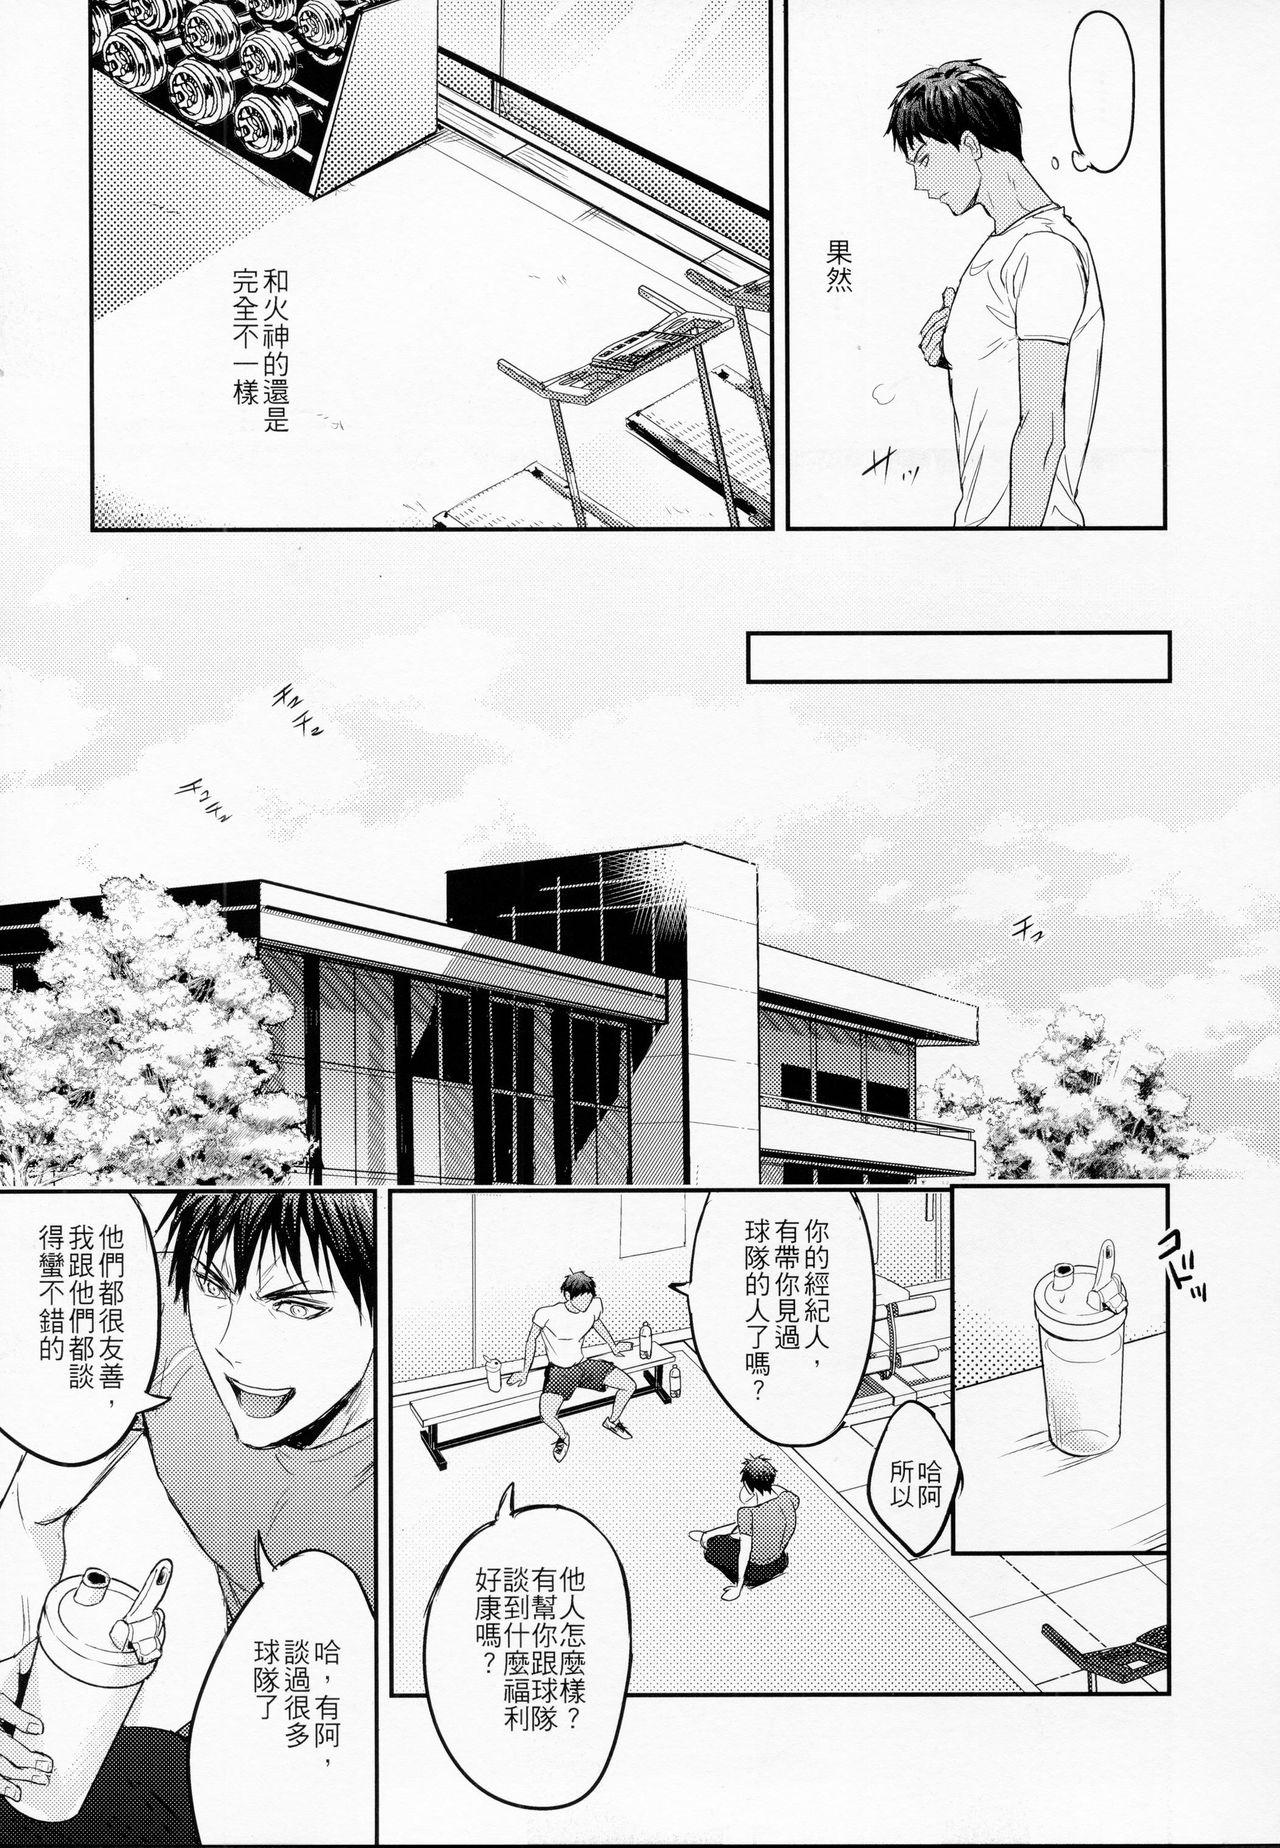 18yearsold This is how we WORK IT OUT - Kuroko no basuke Pack - Page 6